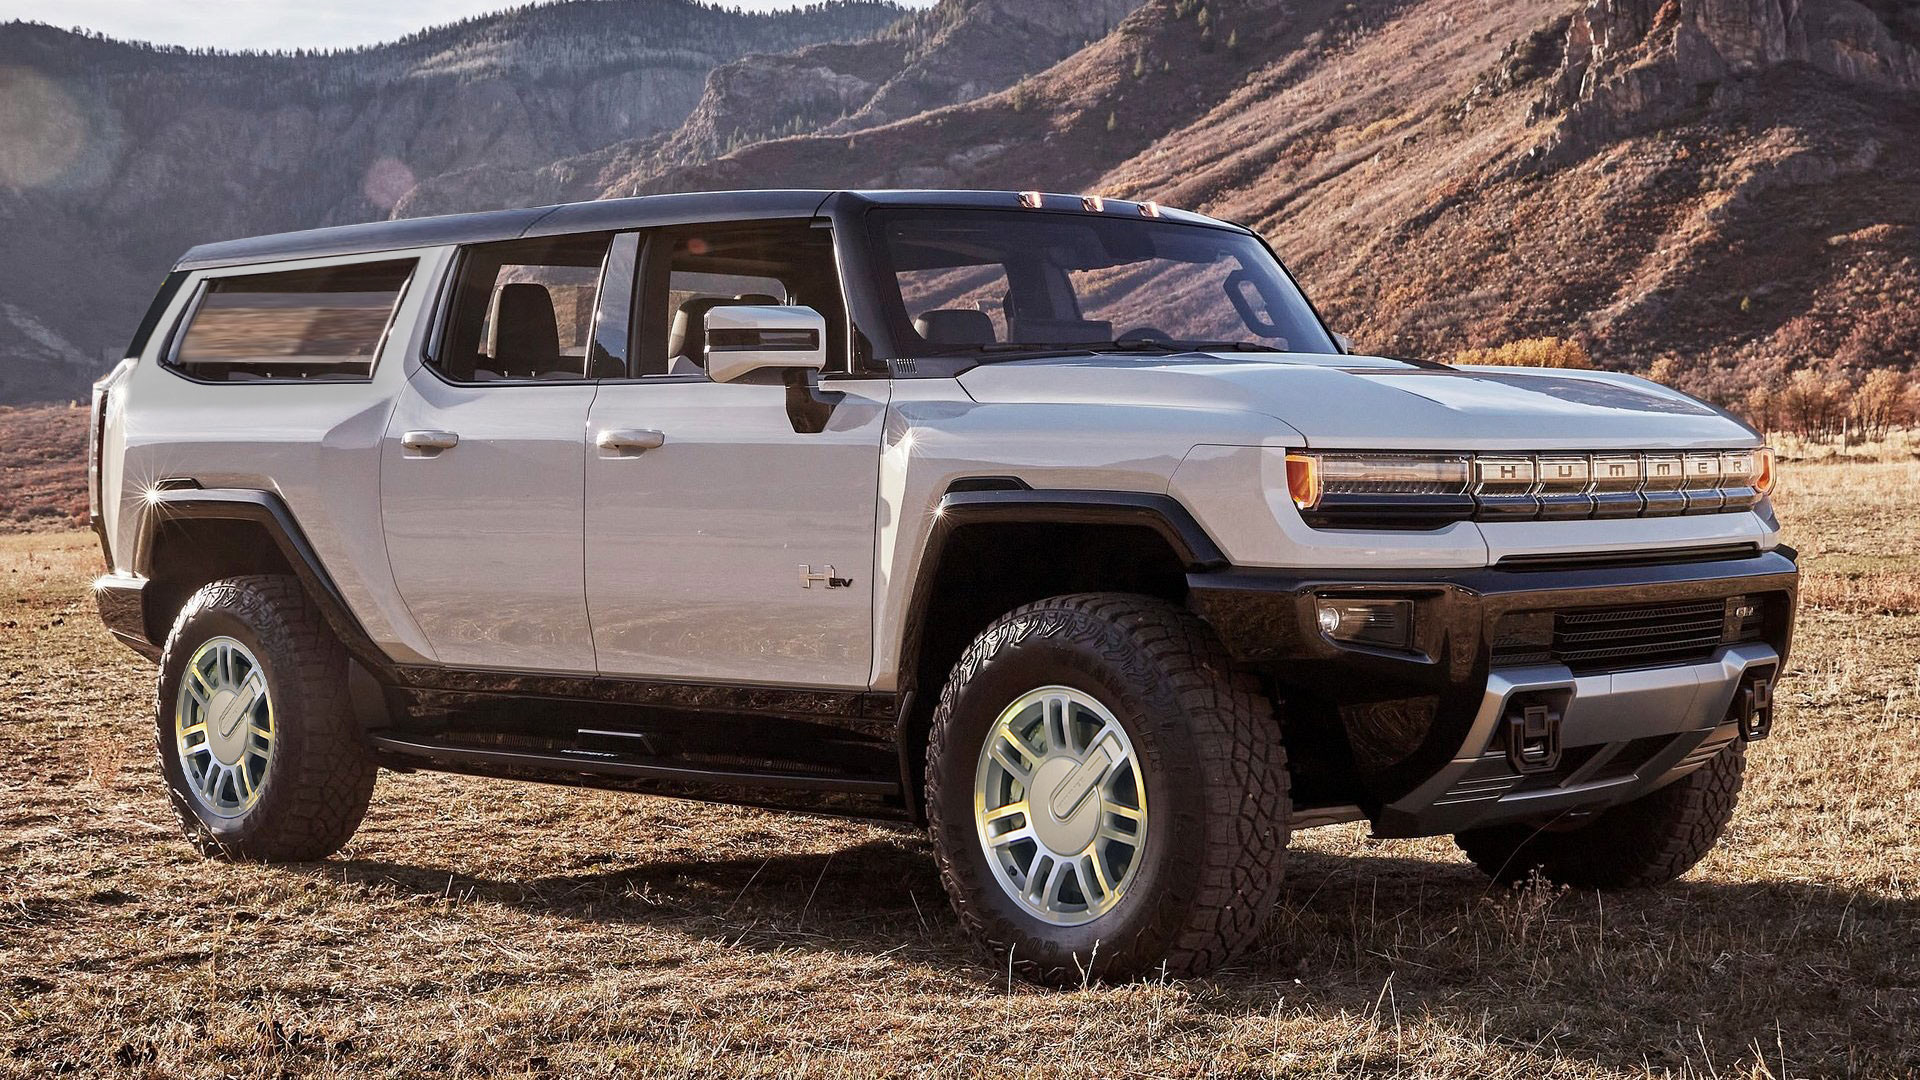 Gmc Hummer Ev Gets Suv Redesign With H3 Wheels Autoevolution